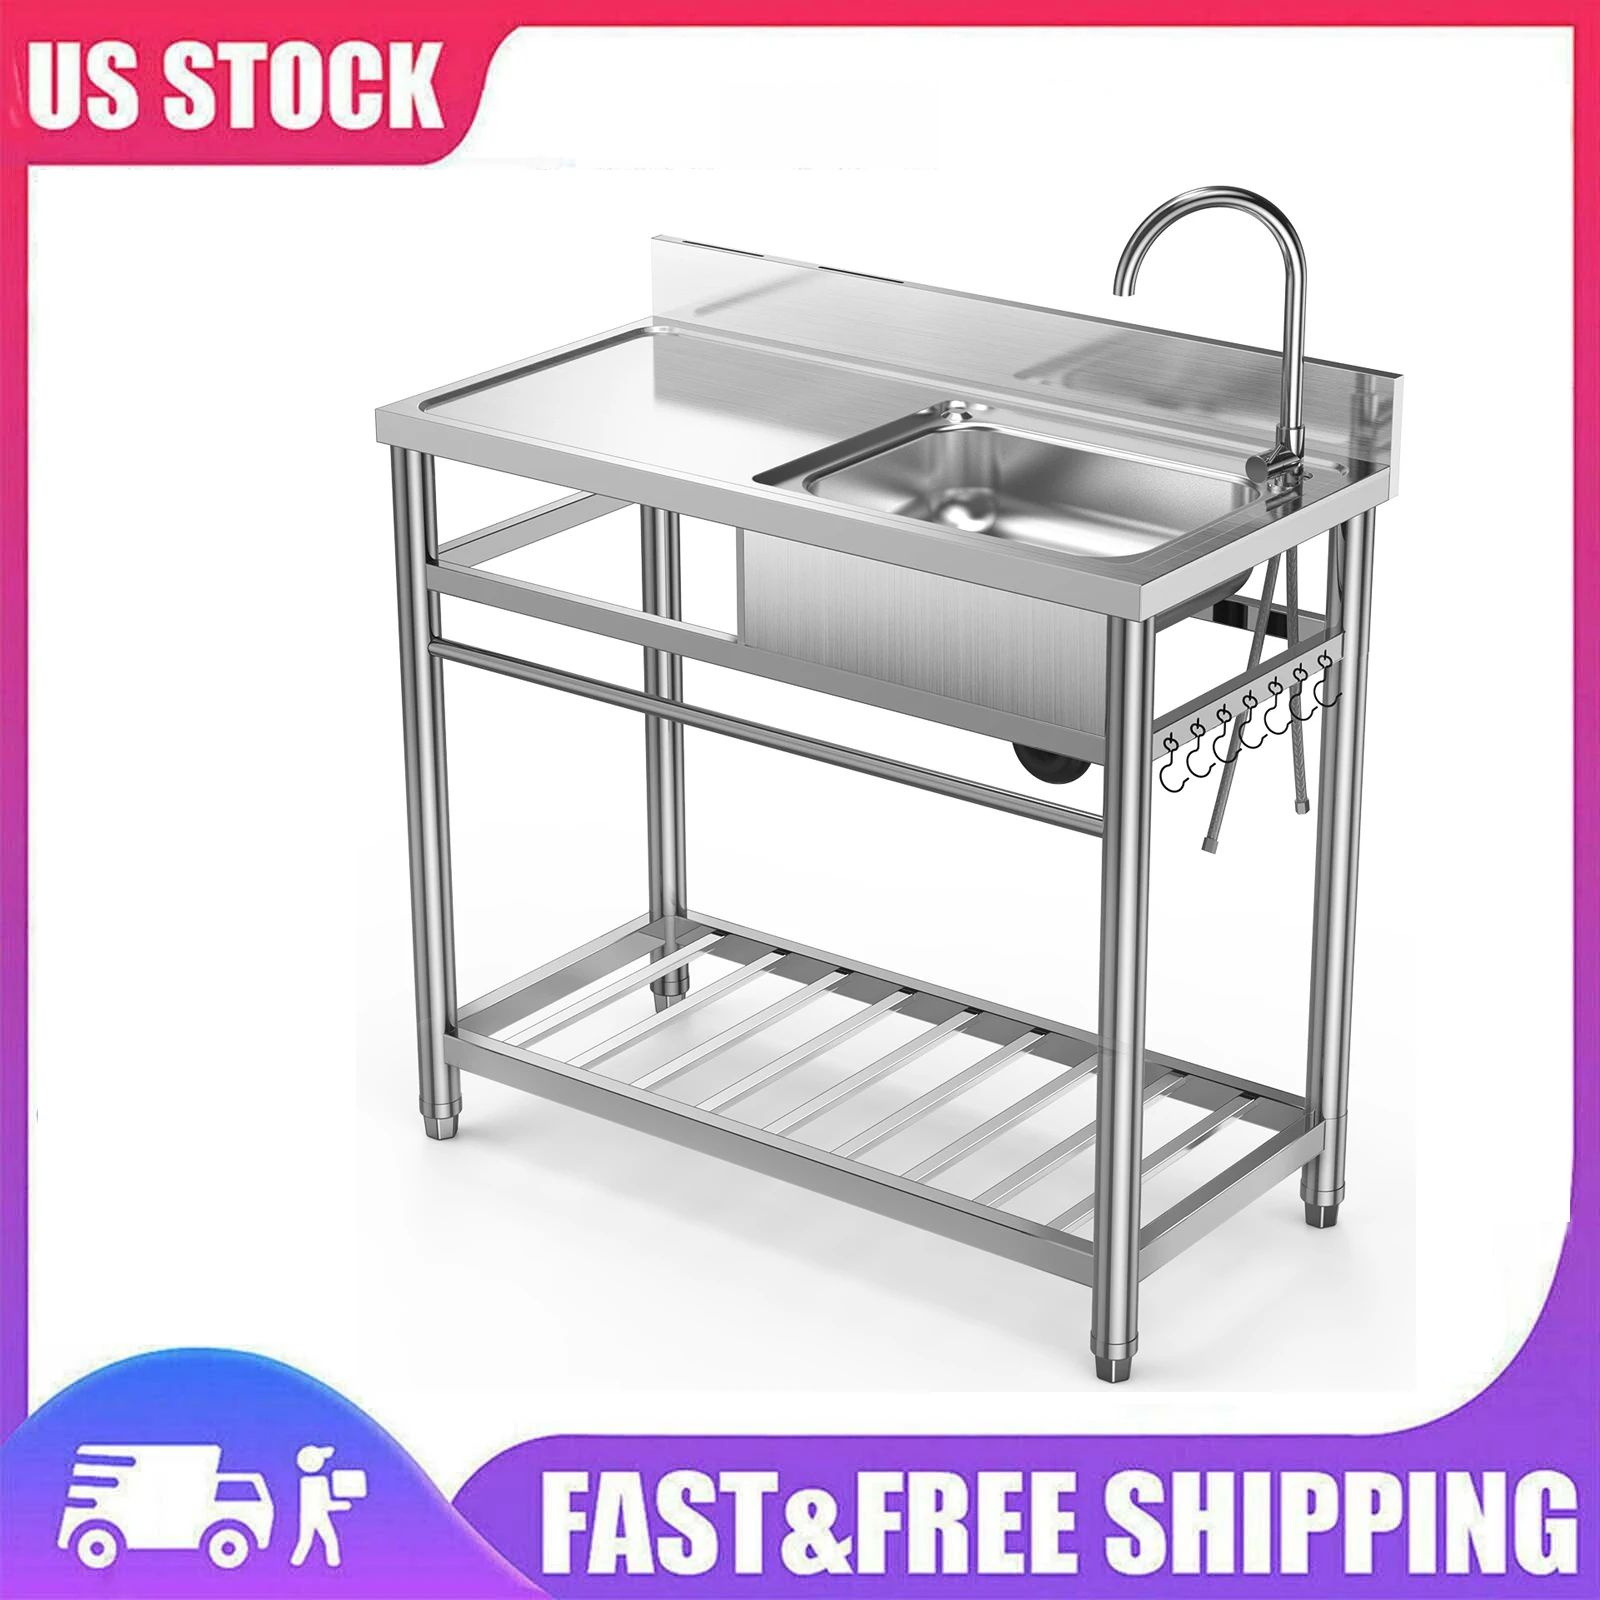 Stainless Steel Utility Sink Single Bowl Restaurant Utility Sink Commercial Kitchen Sink with Water Pipe Faucet and Laundry Tub luanniao kitchen faucet bend pipe 360 degree rotation with water purification features spray paint chrome single handle